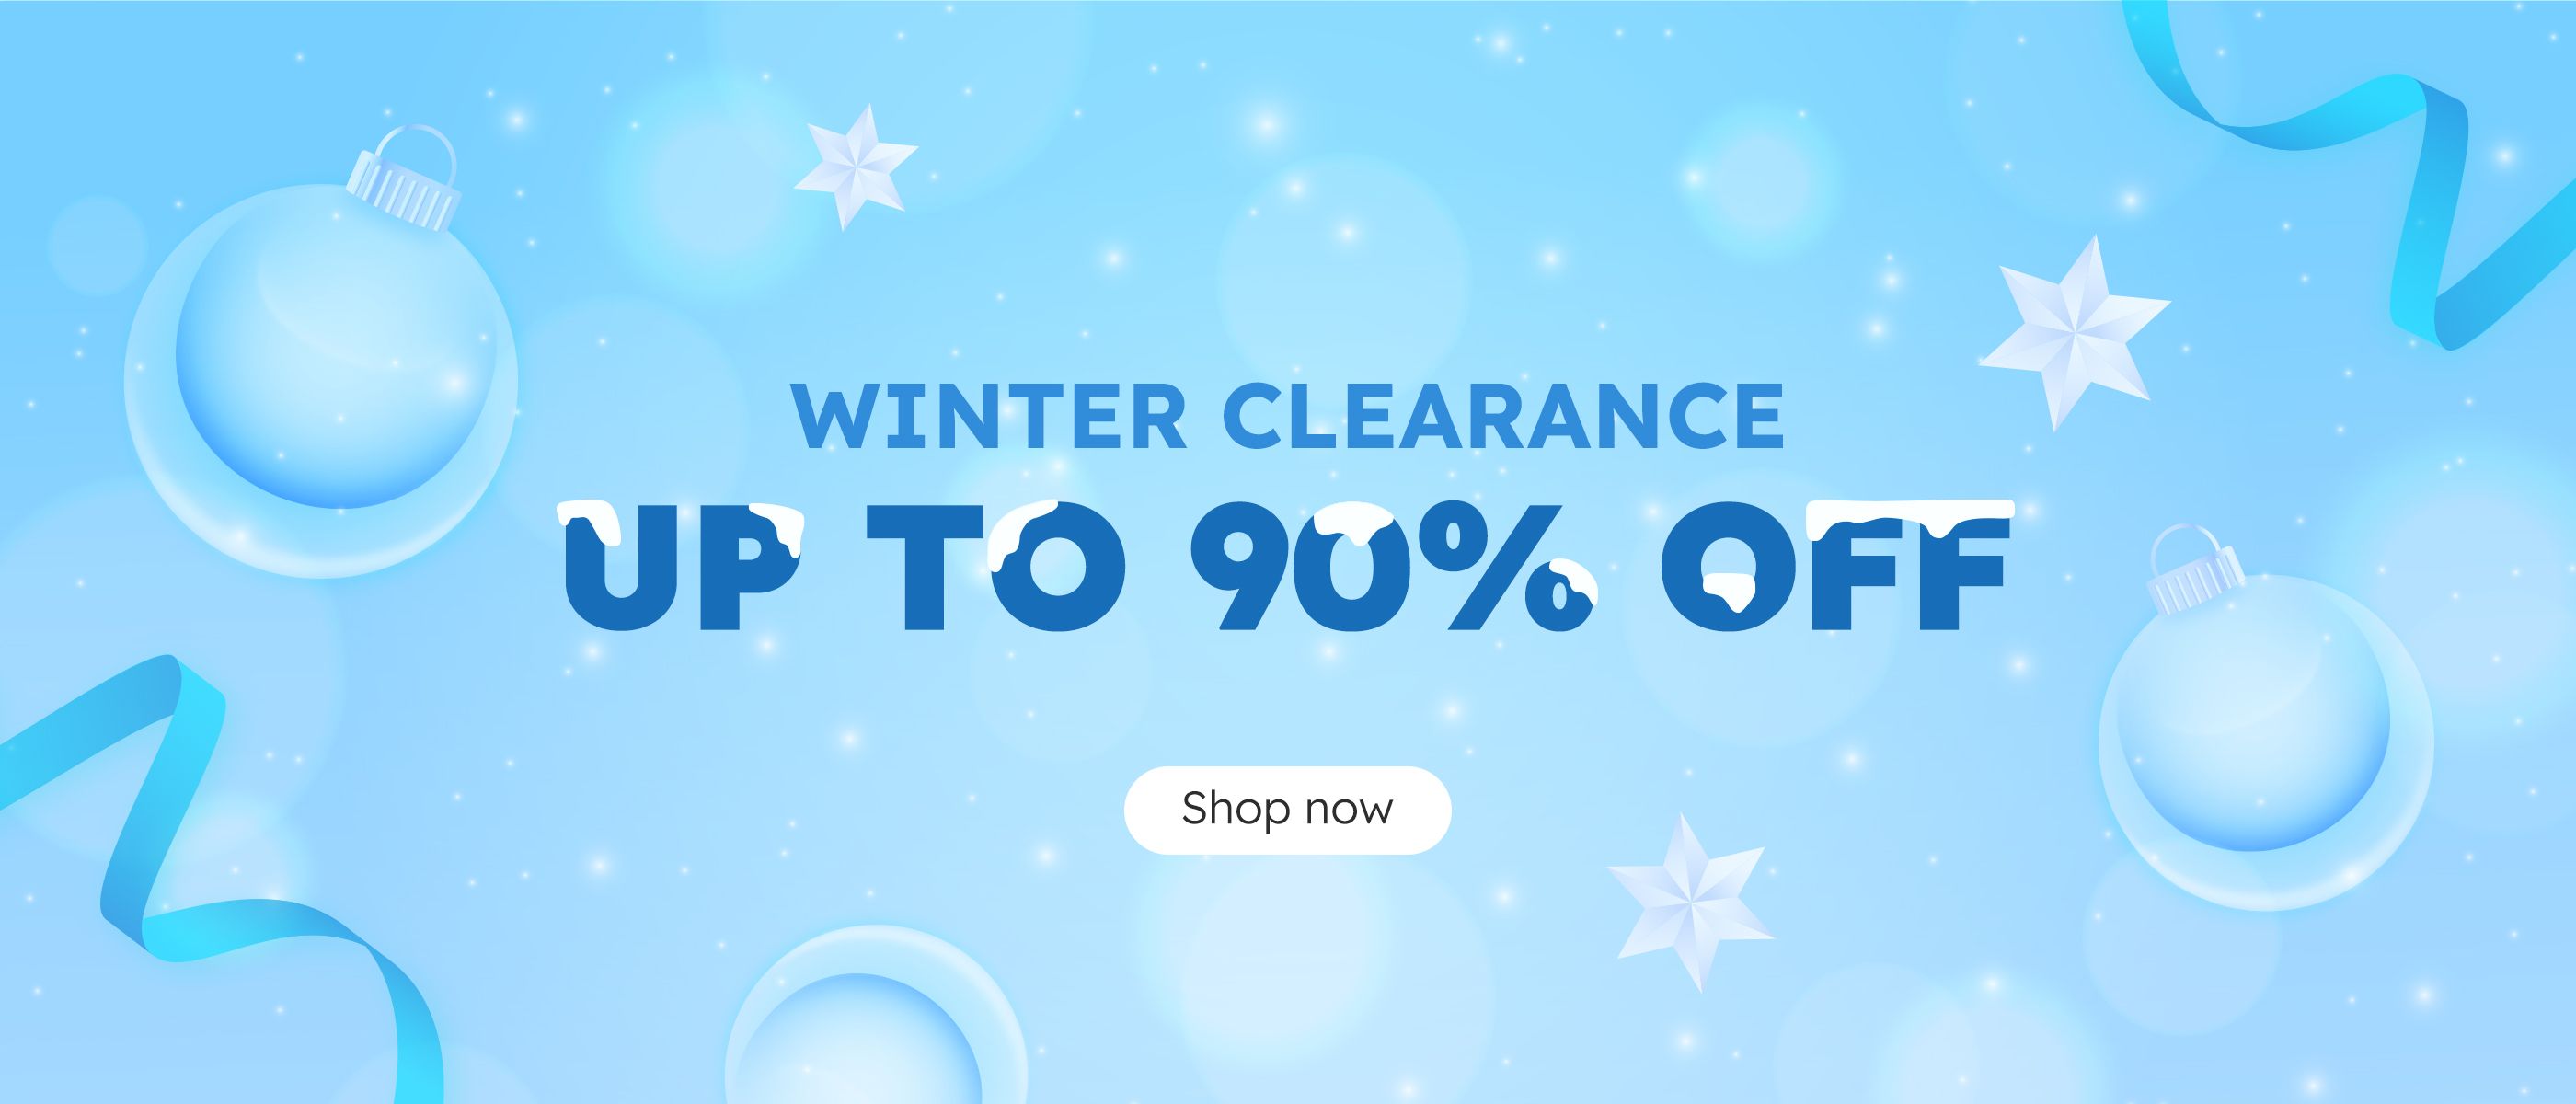 Click it to join Winter Clearance activity